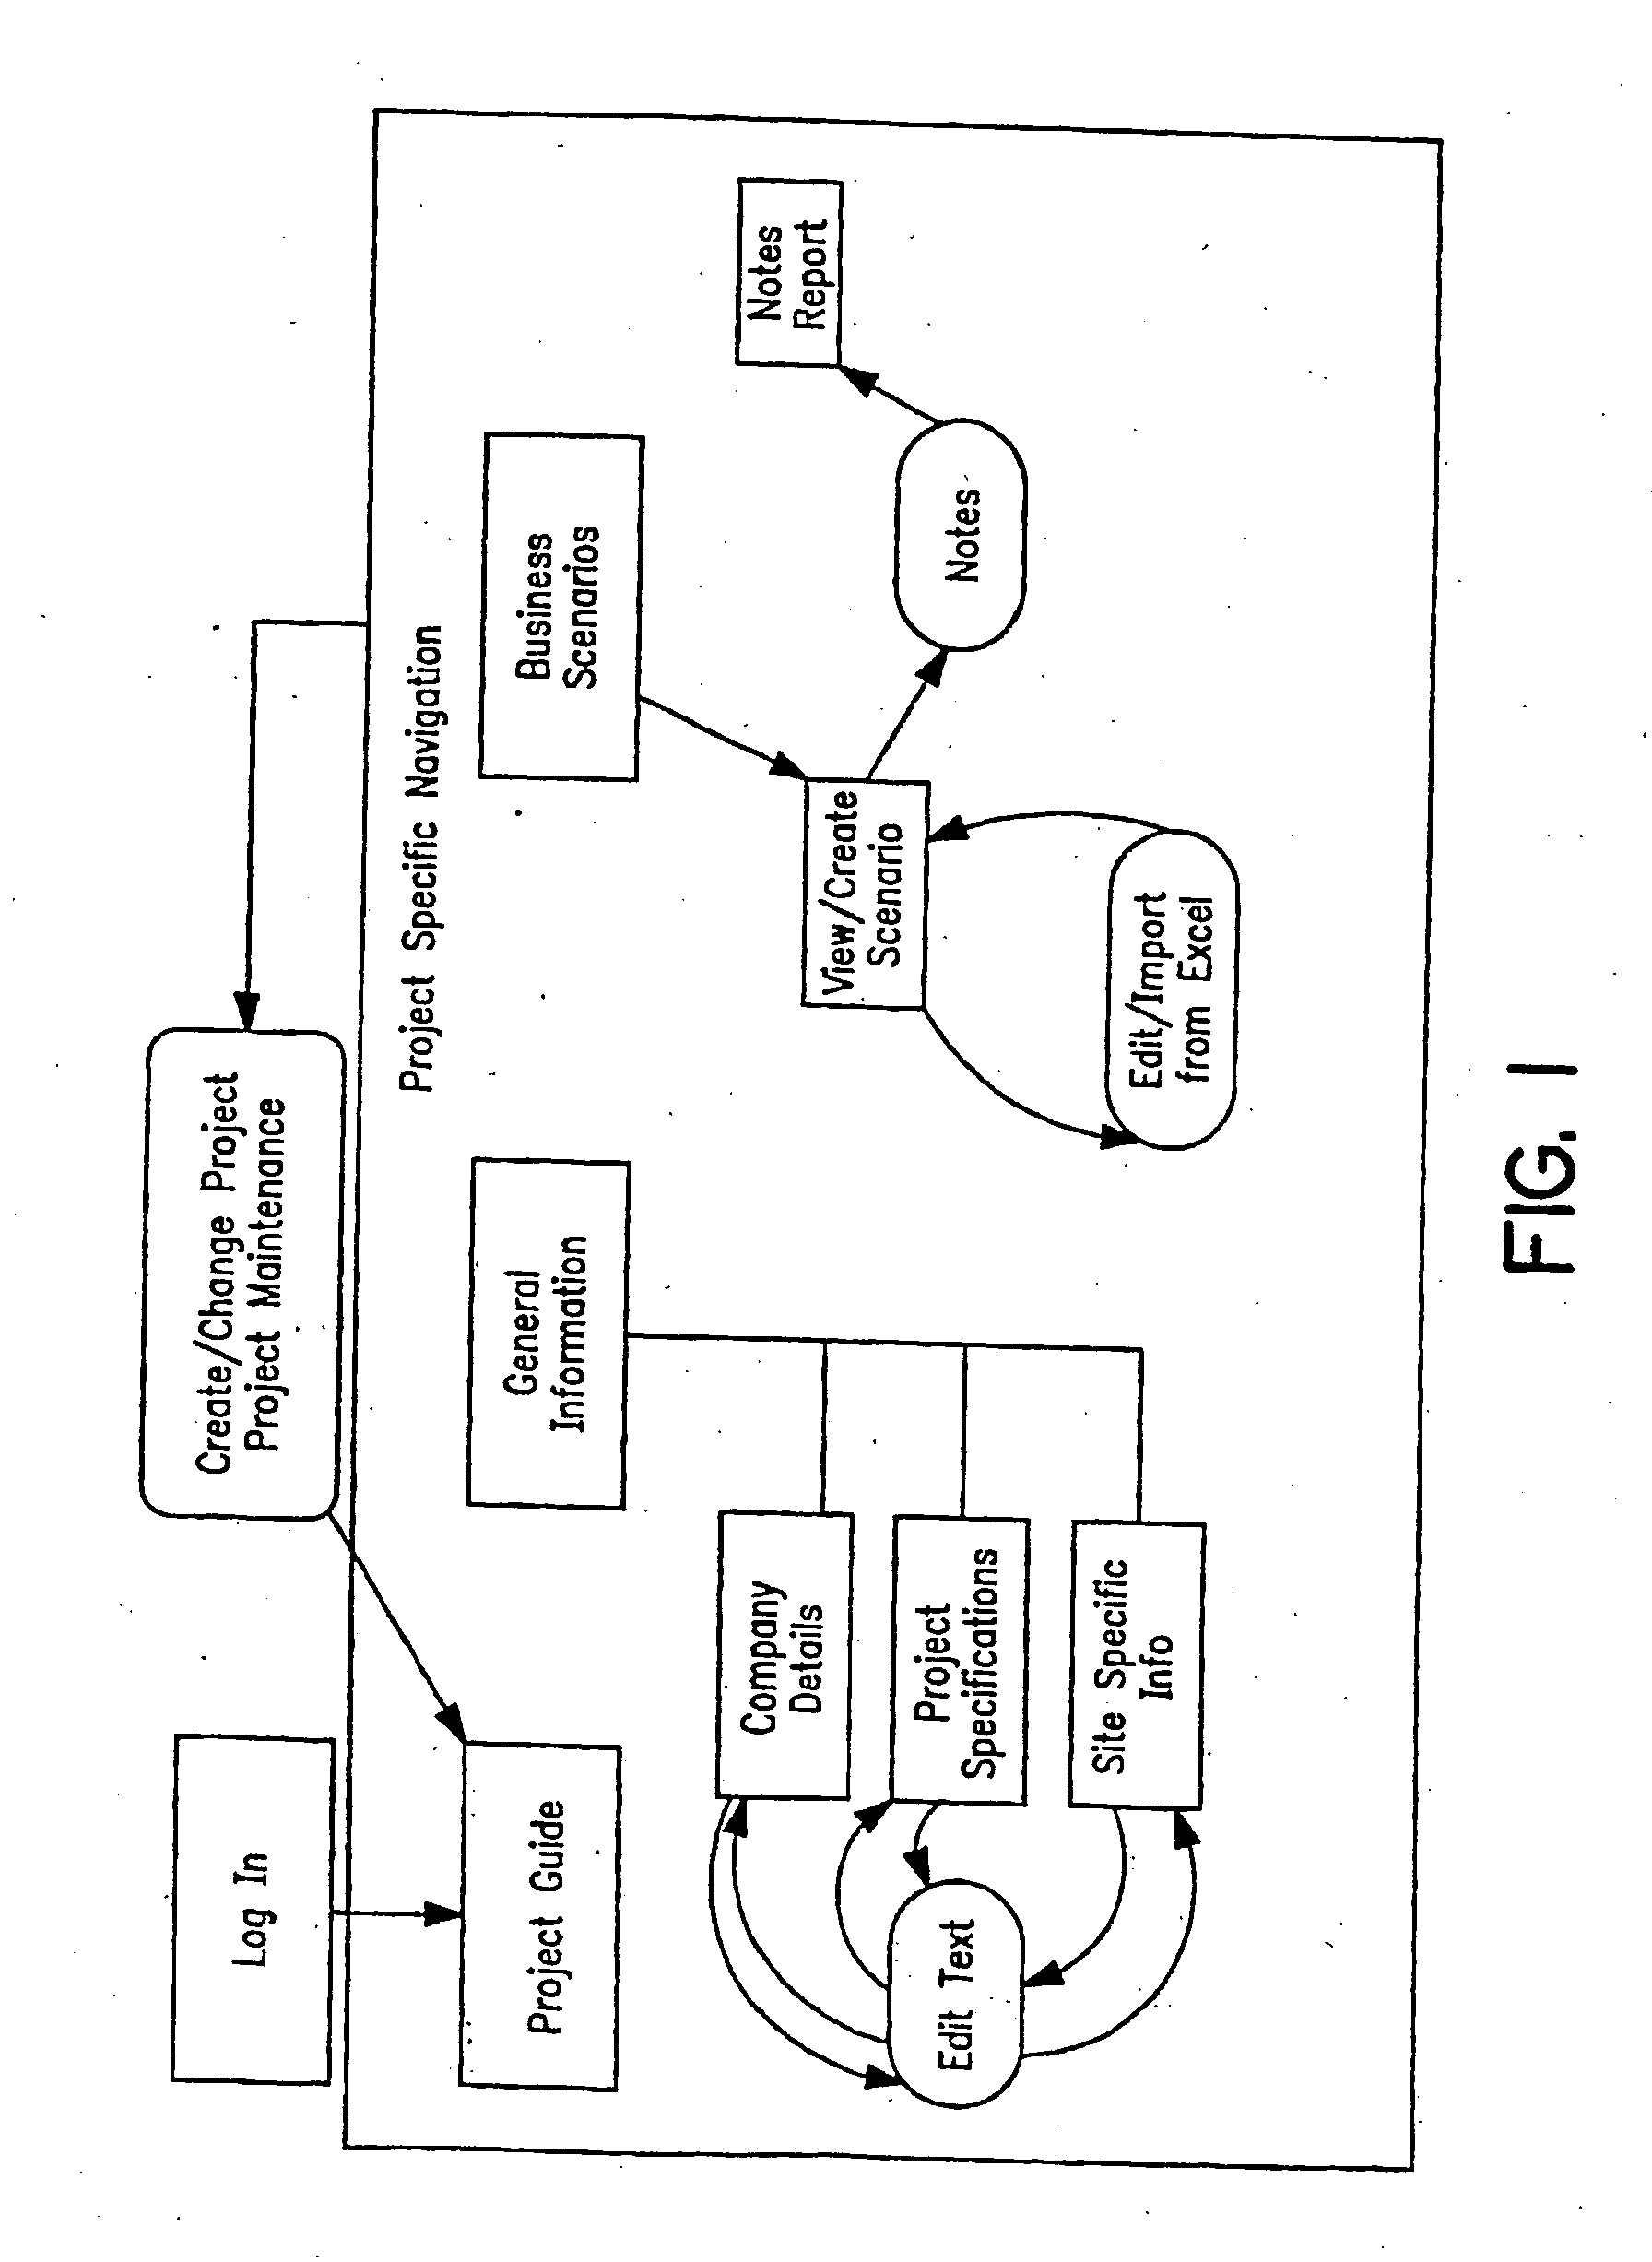 Method of making capital investment decisions concerning locations for business operations and/or facilities